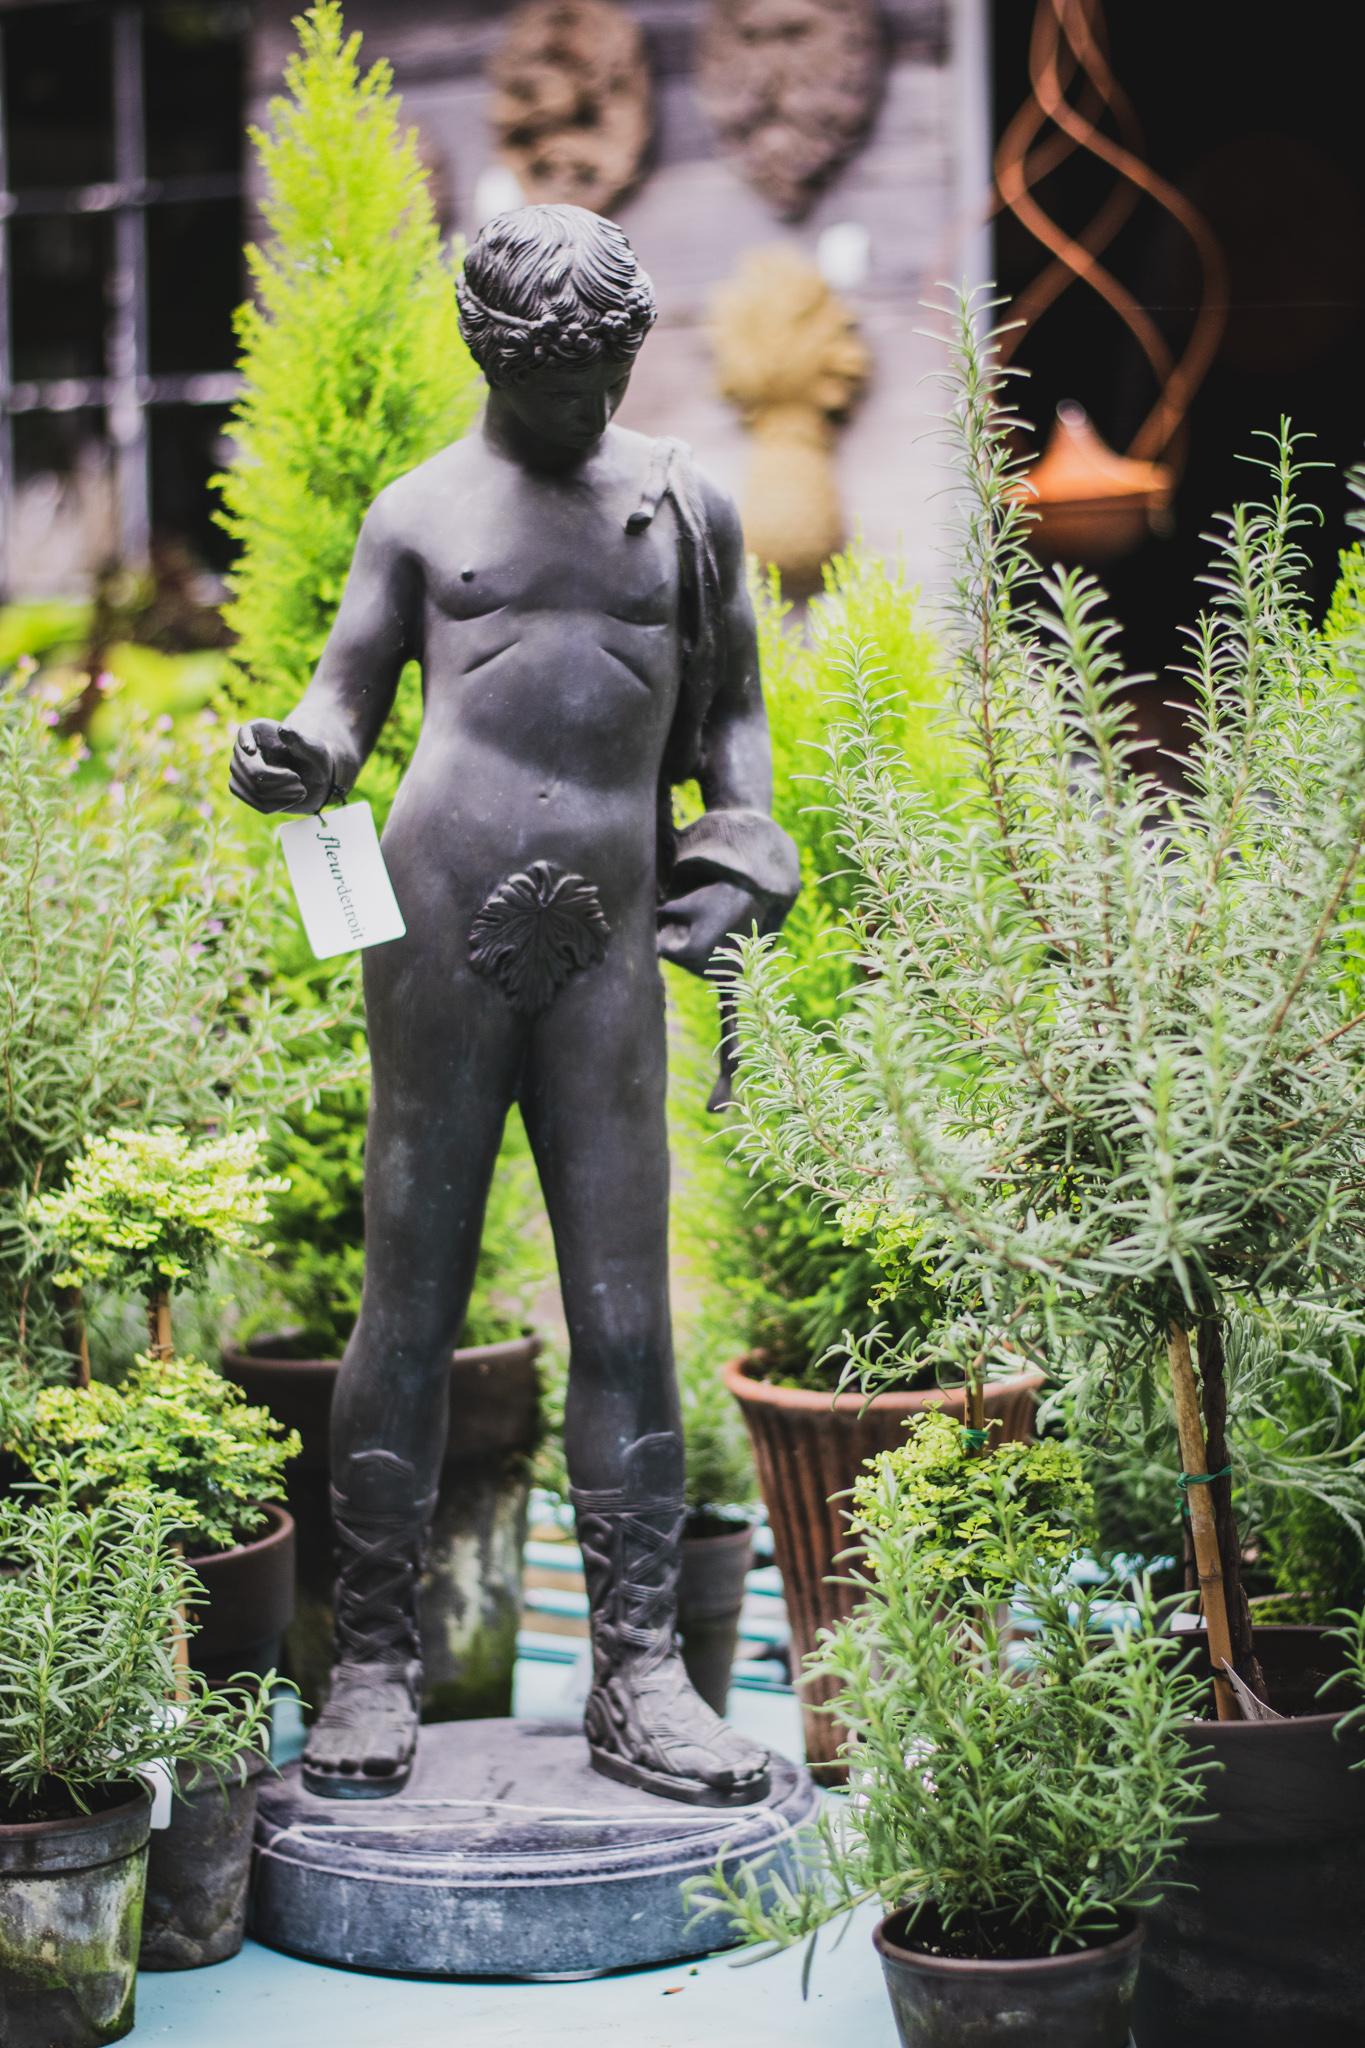 For centuries, artists have been inspired by the human figure and crafted the likeness in a multitude of materials. One of the most popular and ancient of these materials is cast bronze for its versatility and resilient strength. 
This figure of a